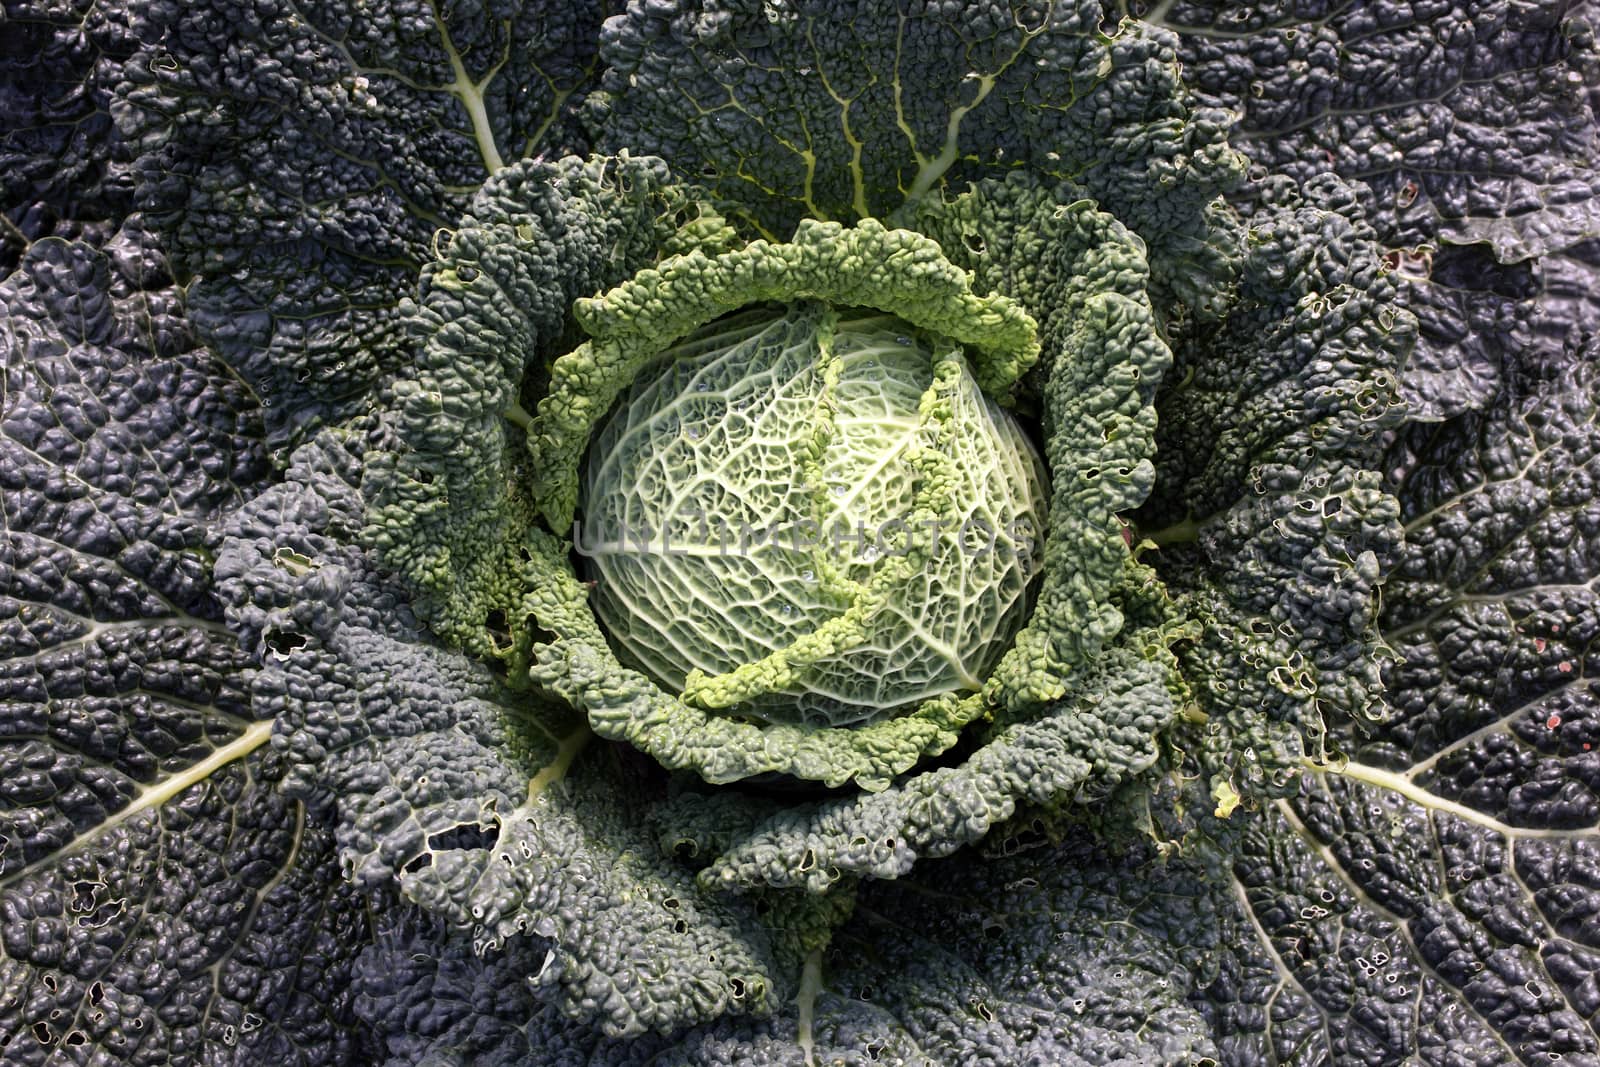 Cabbage (Brassica oleracea) grown for its food health diet benefits in an agriculture garden allotment stock image